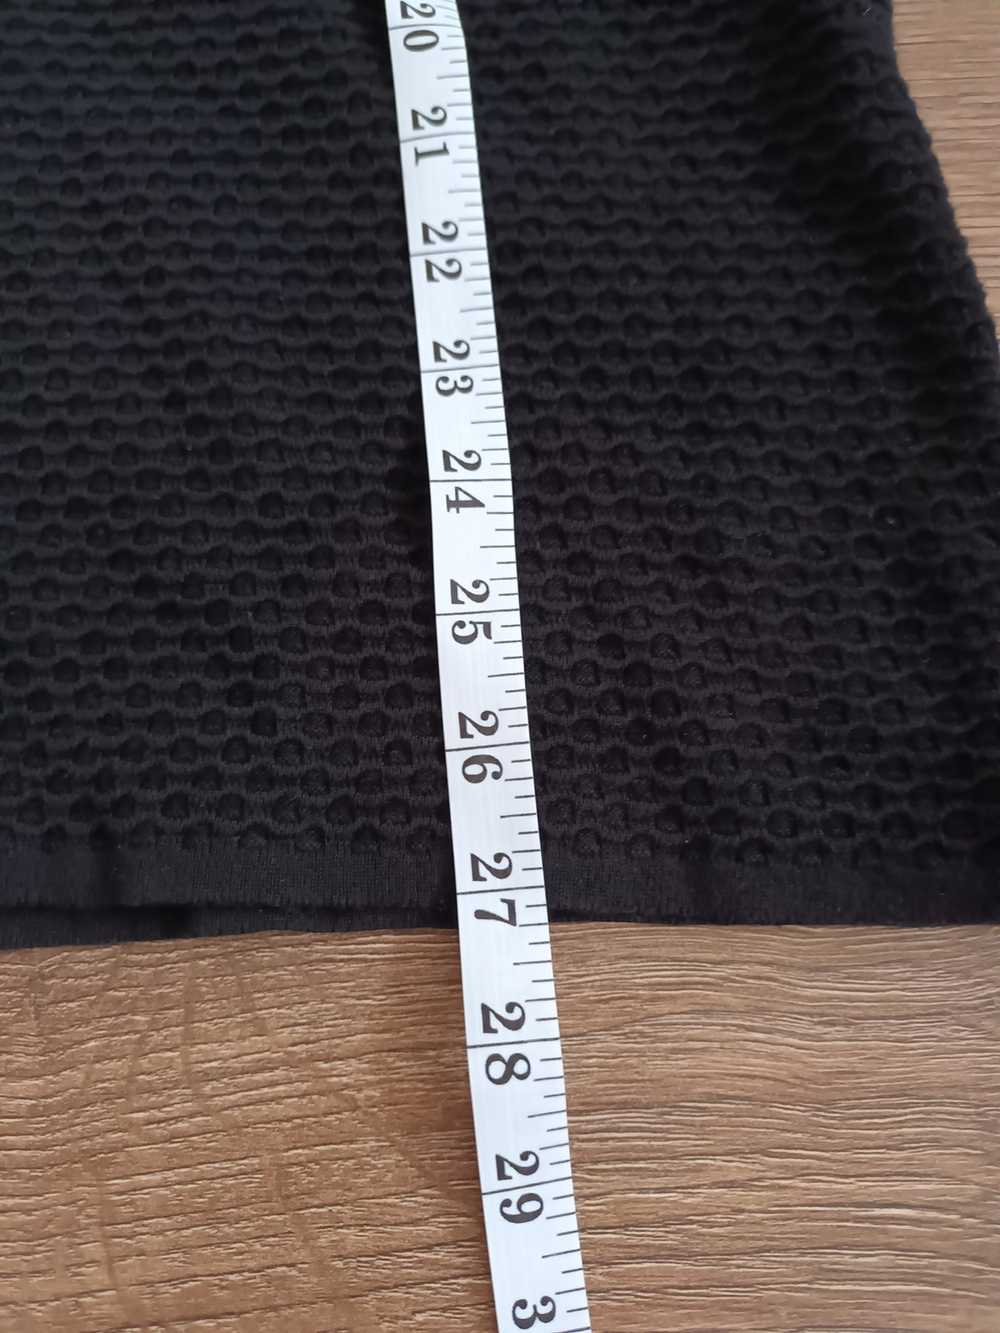 Cos COS Womens Waffle Knit Black Sweater Size XS - image 4